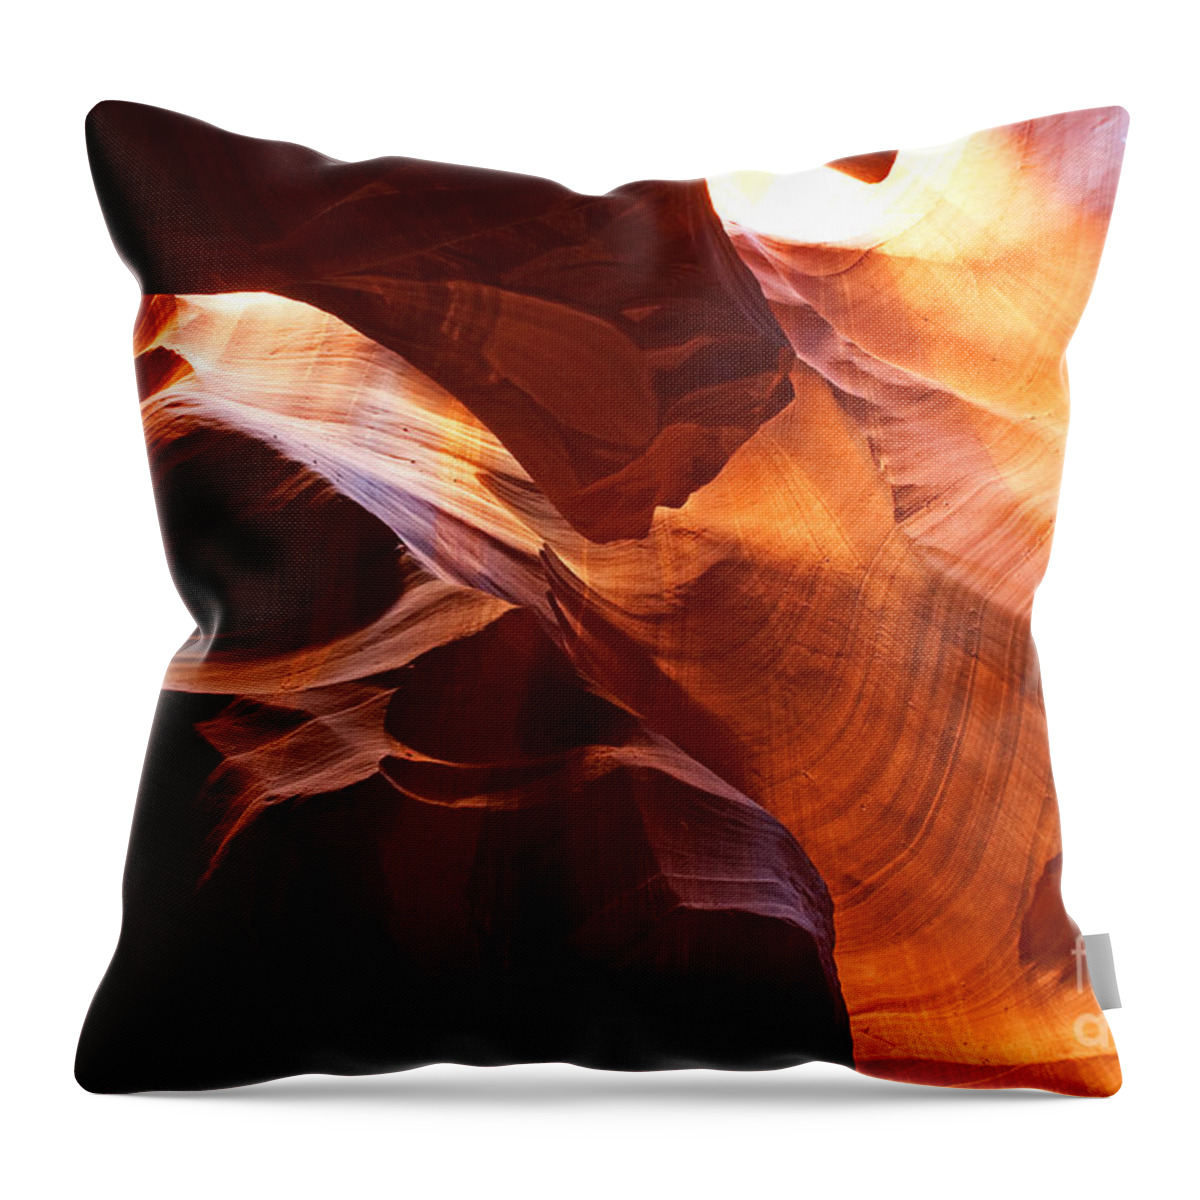 Arizona Throw Pillow featuring the photograph Shades of Reflections by Bob and Nancy Kendrick